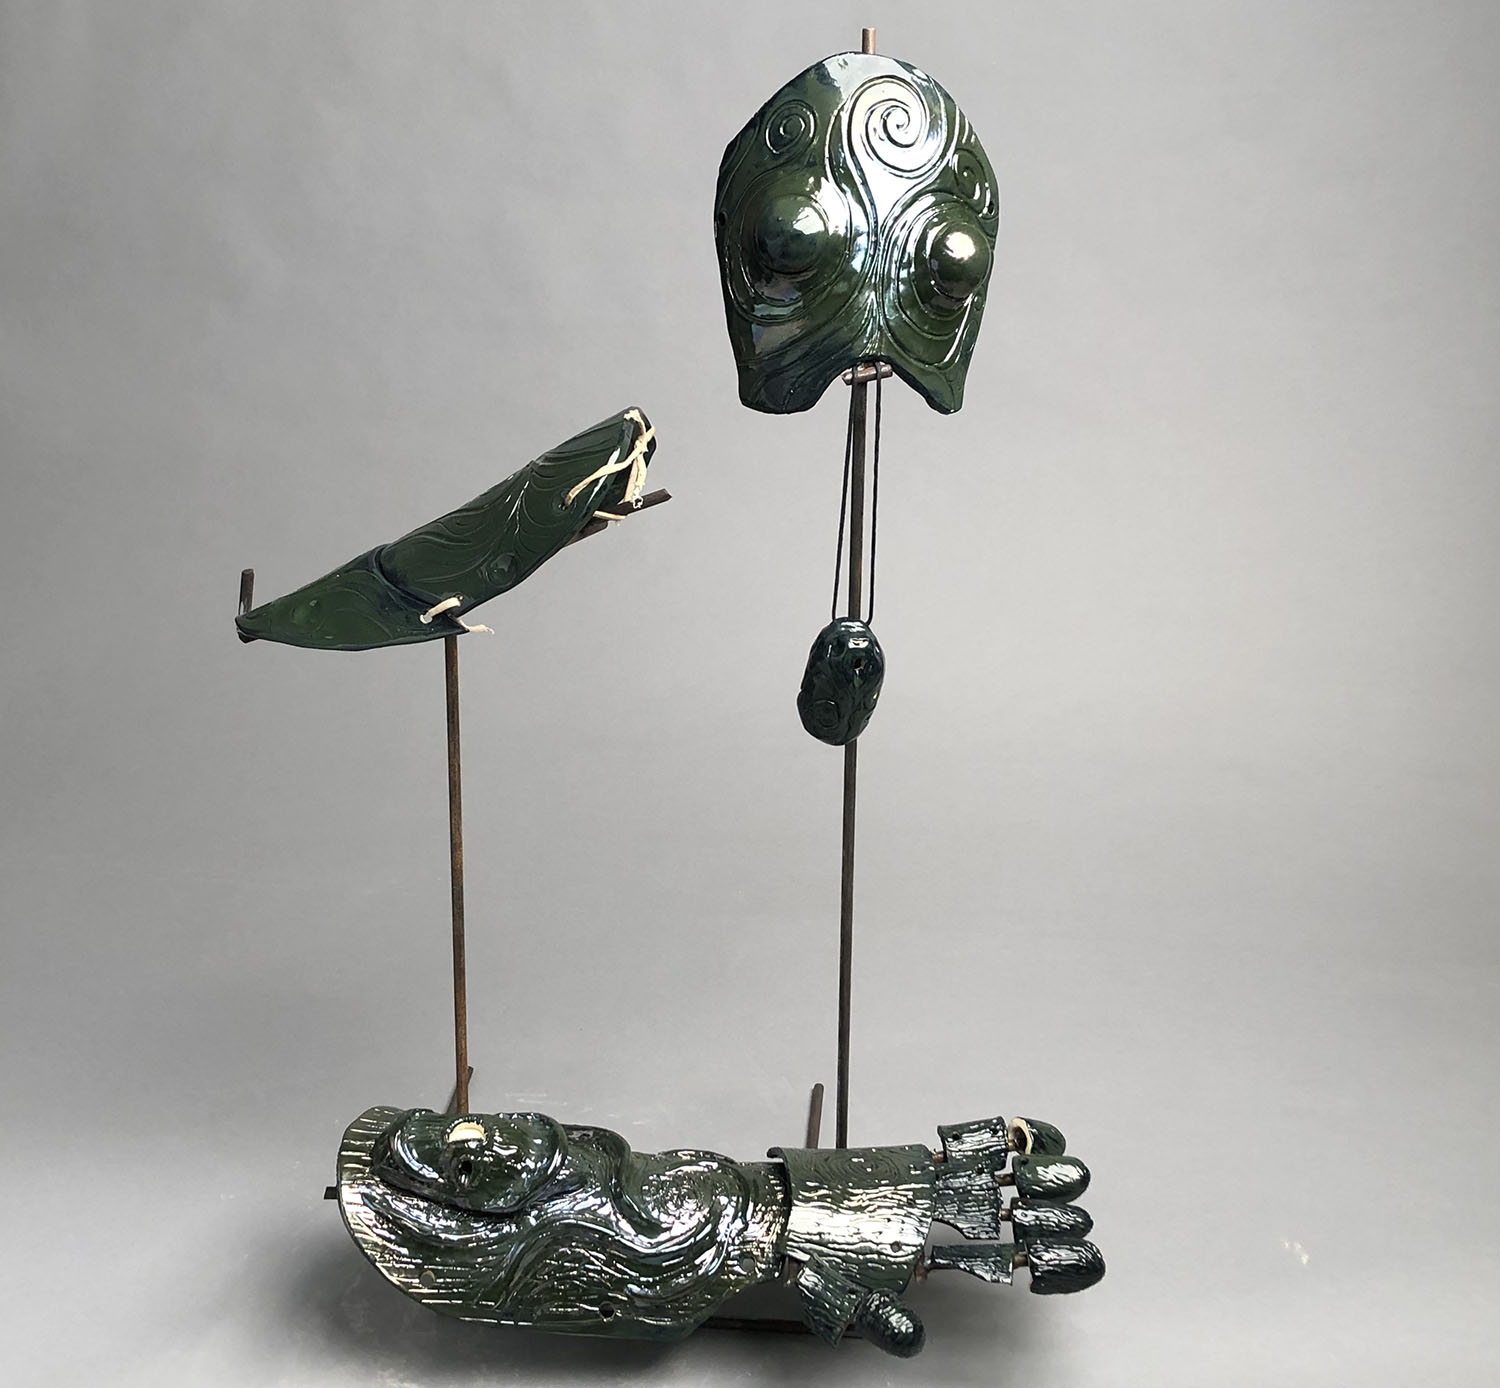 Metal frame supporting ceramic armor pieces with head, shoulder, arm and hand piece with iridescent green glaze and swirling pattern designs. 